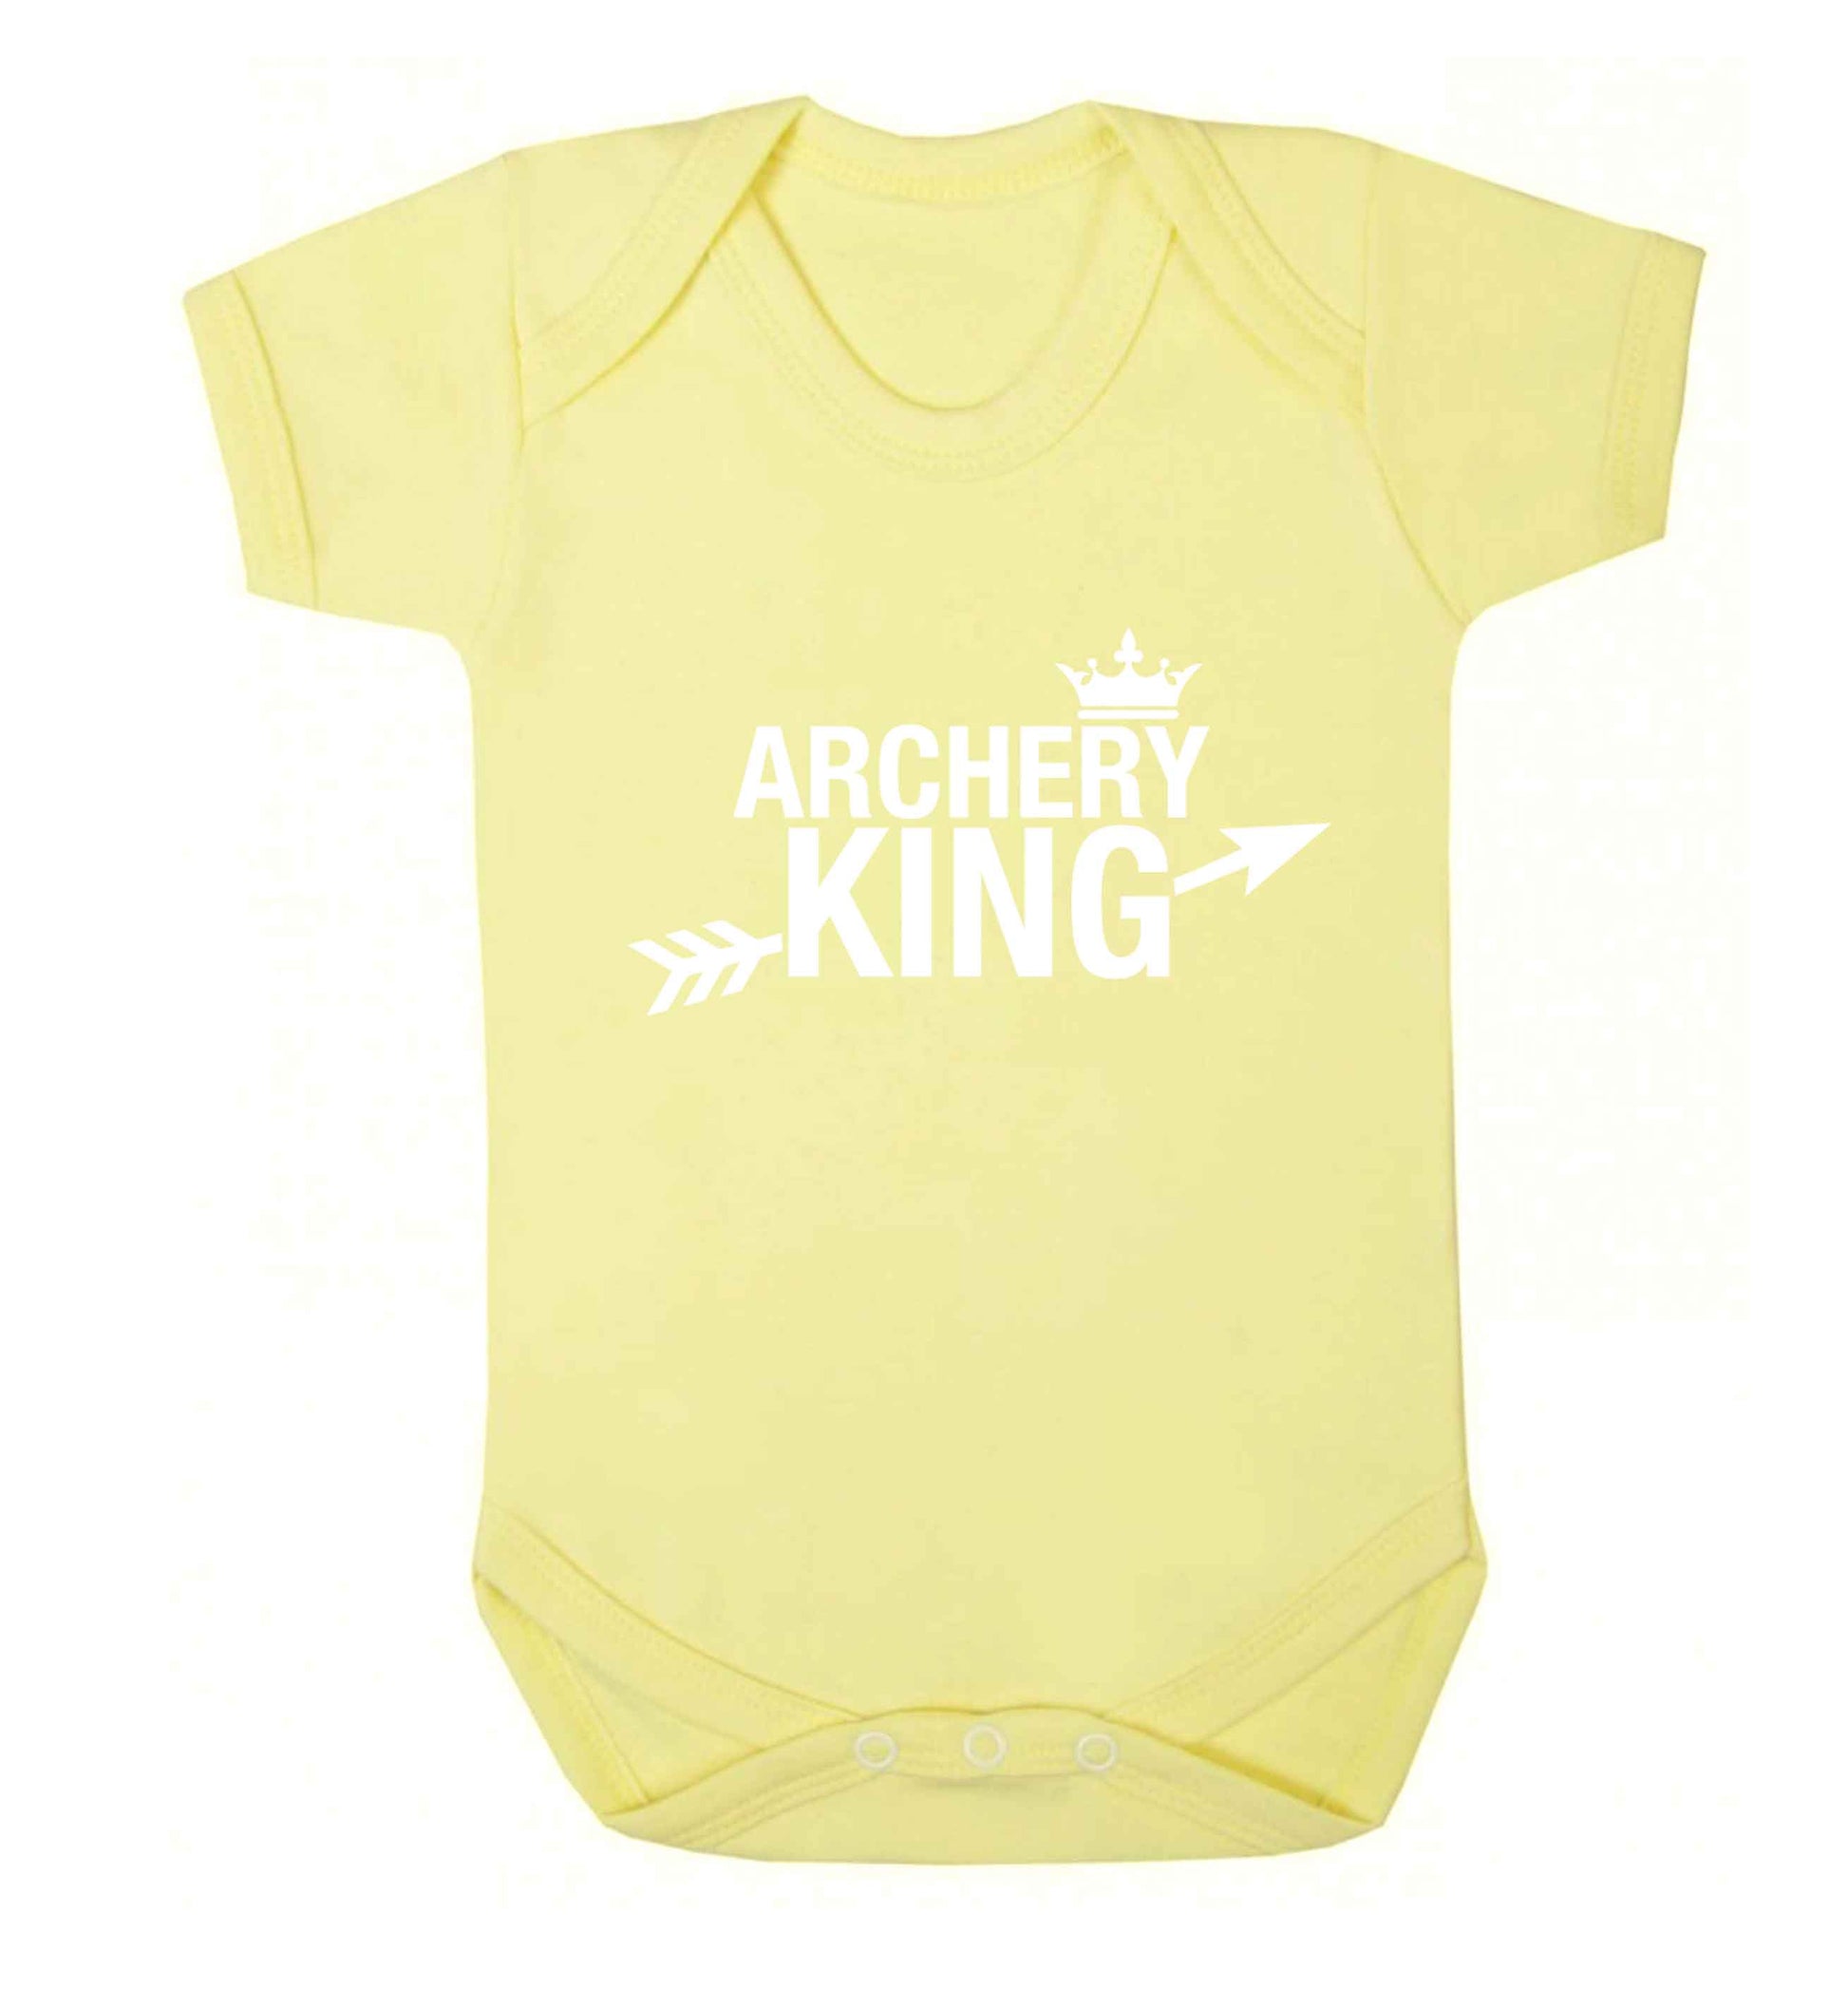 Archery king Baby Vest pale yellow 18-24 months